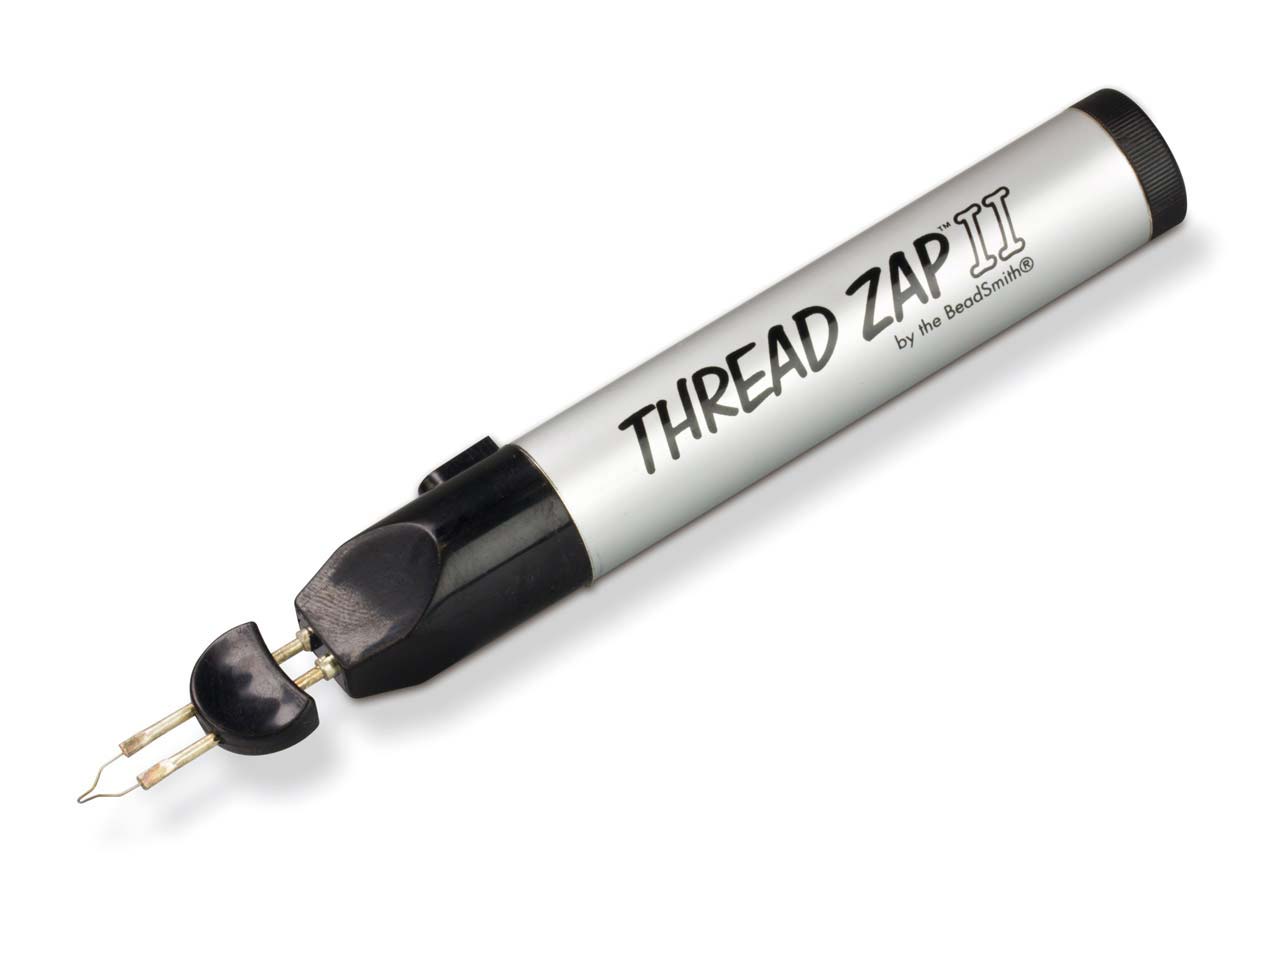 ThreadZap™ & CordZap™ thread and cord burners by the BeadSmith